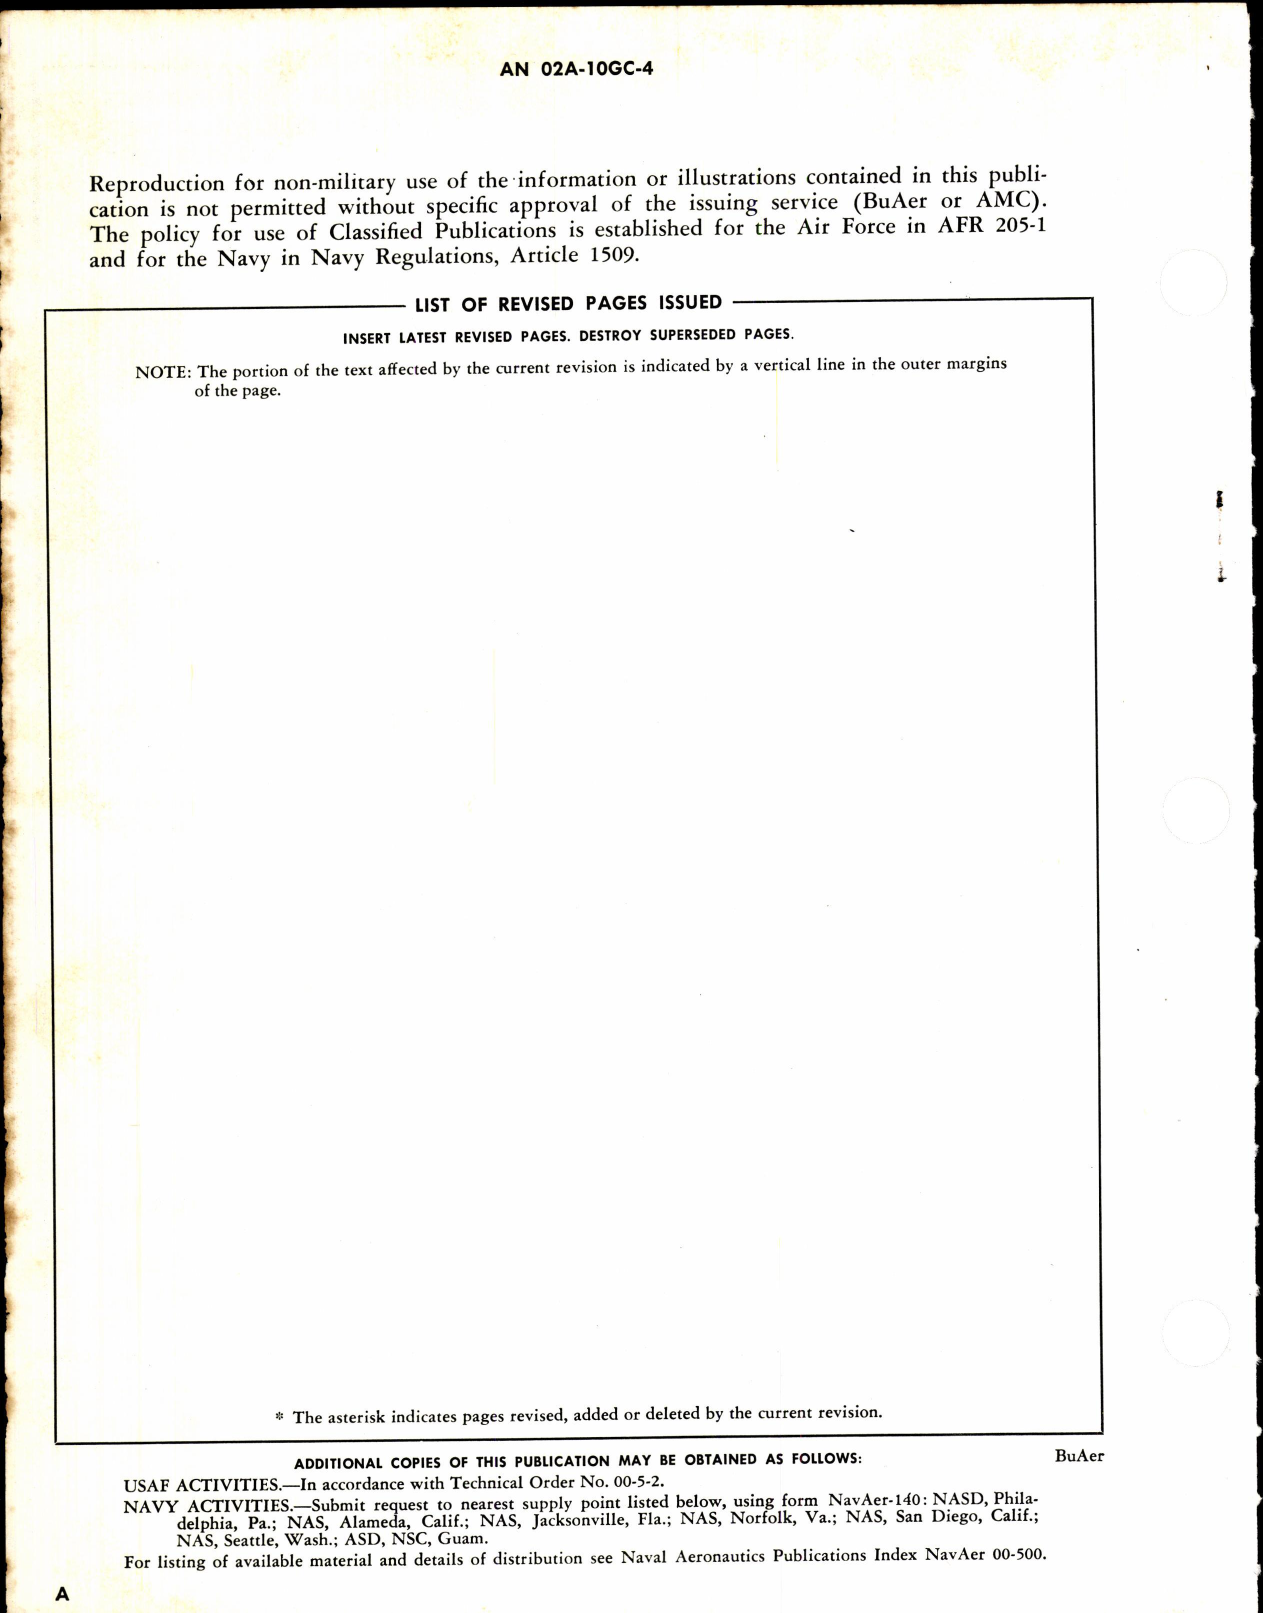 Sample page 2 from AirCorps Library document: Parts Catalog for Models R-2800-34